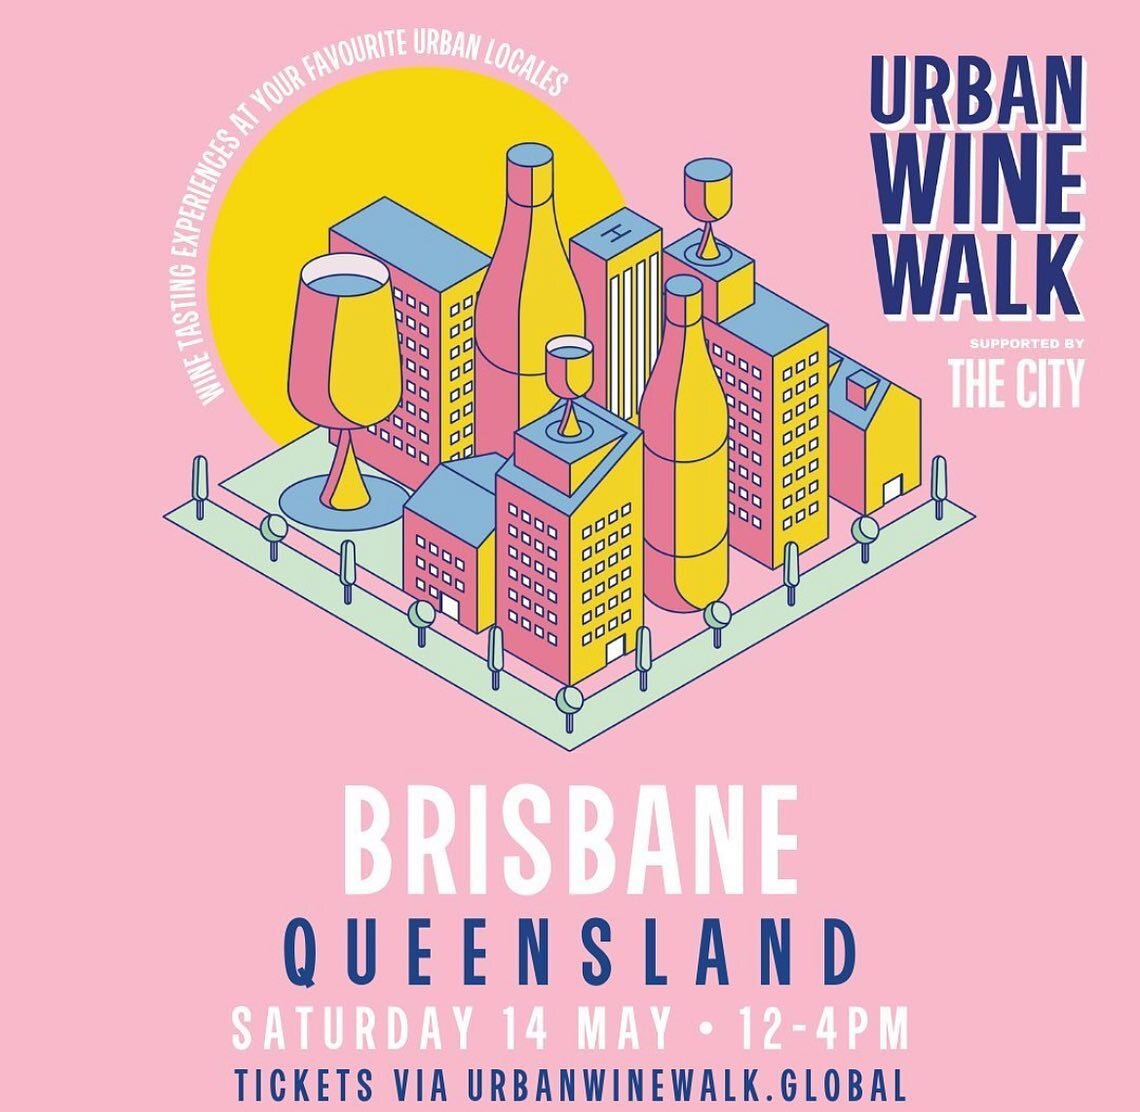 🍷 Urban Wine Walk 14th May

We will be participating and showcasing @gerlerwines from our friends @citywinerybne 🌟

We will be offering a @gerlerwines tasting paddle with a selection of local and sustainable food to accompany the amazing wines! 

L